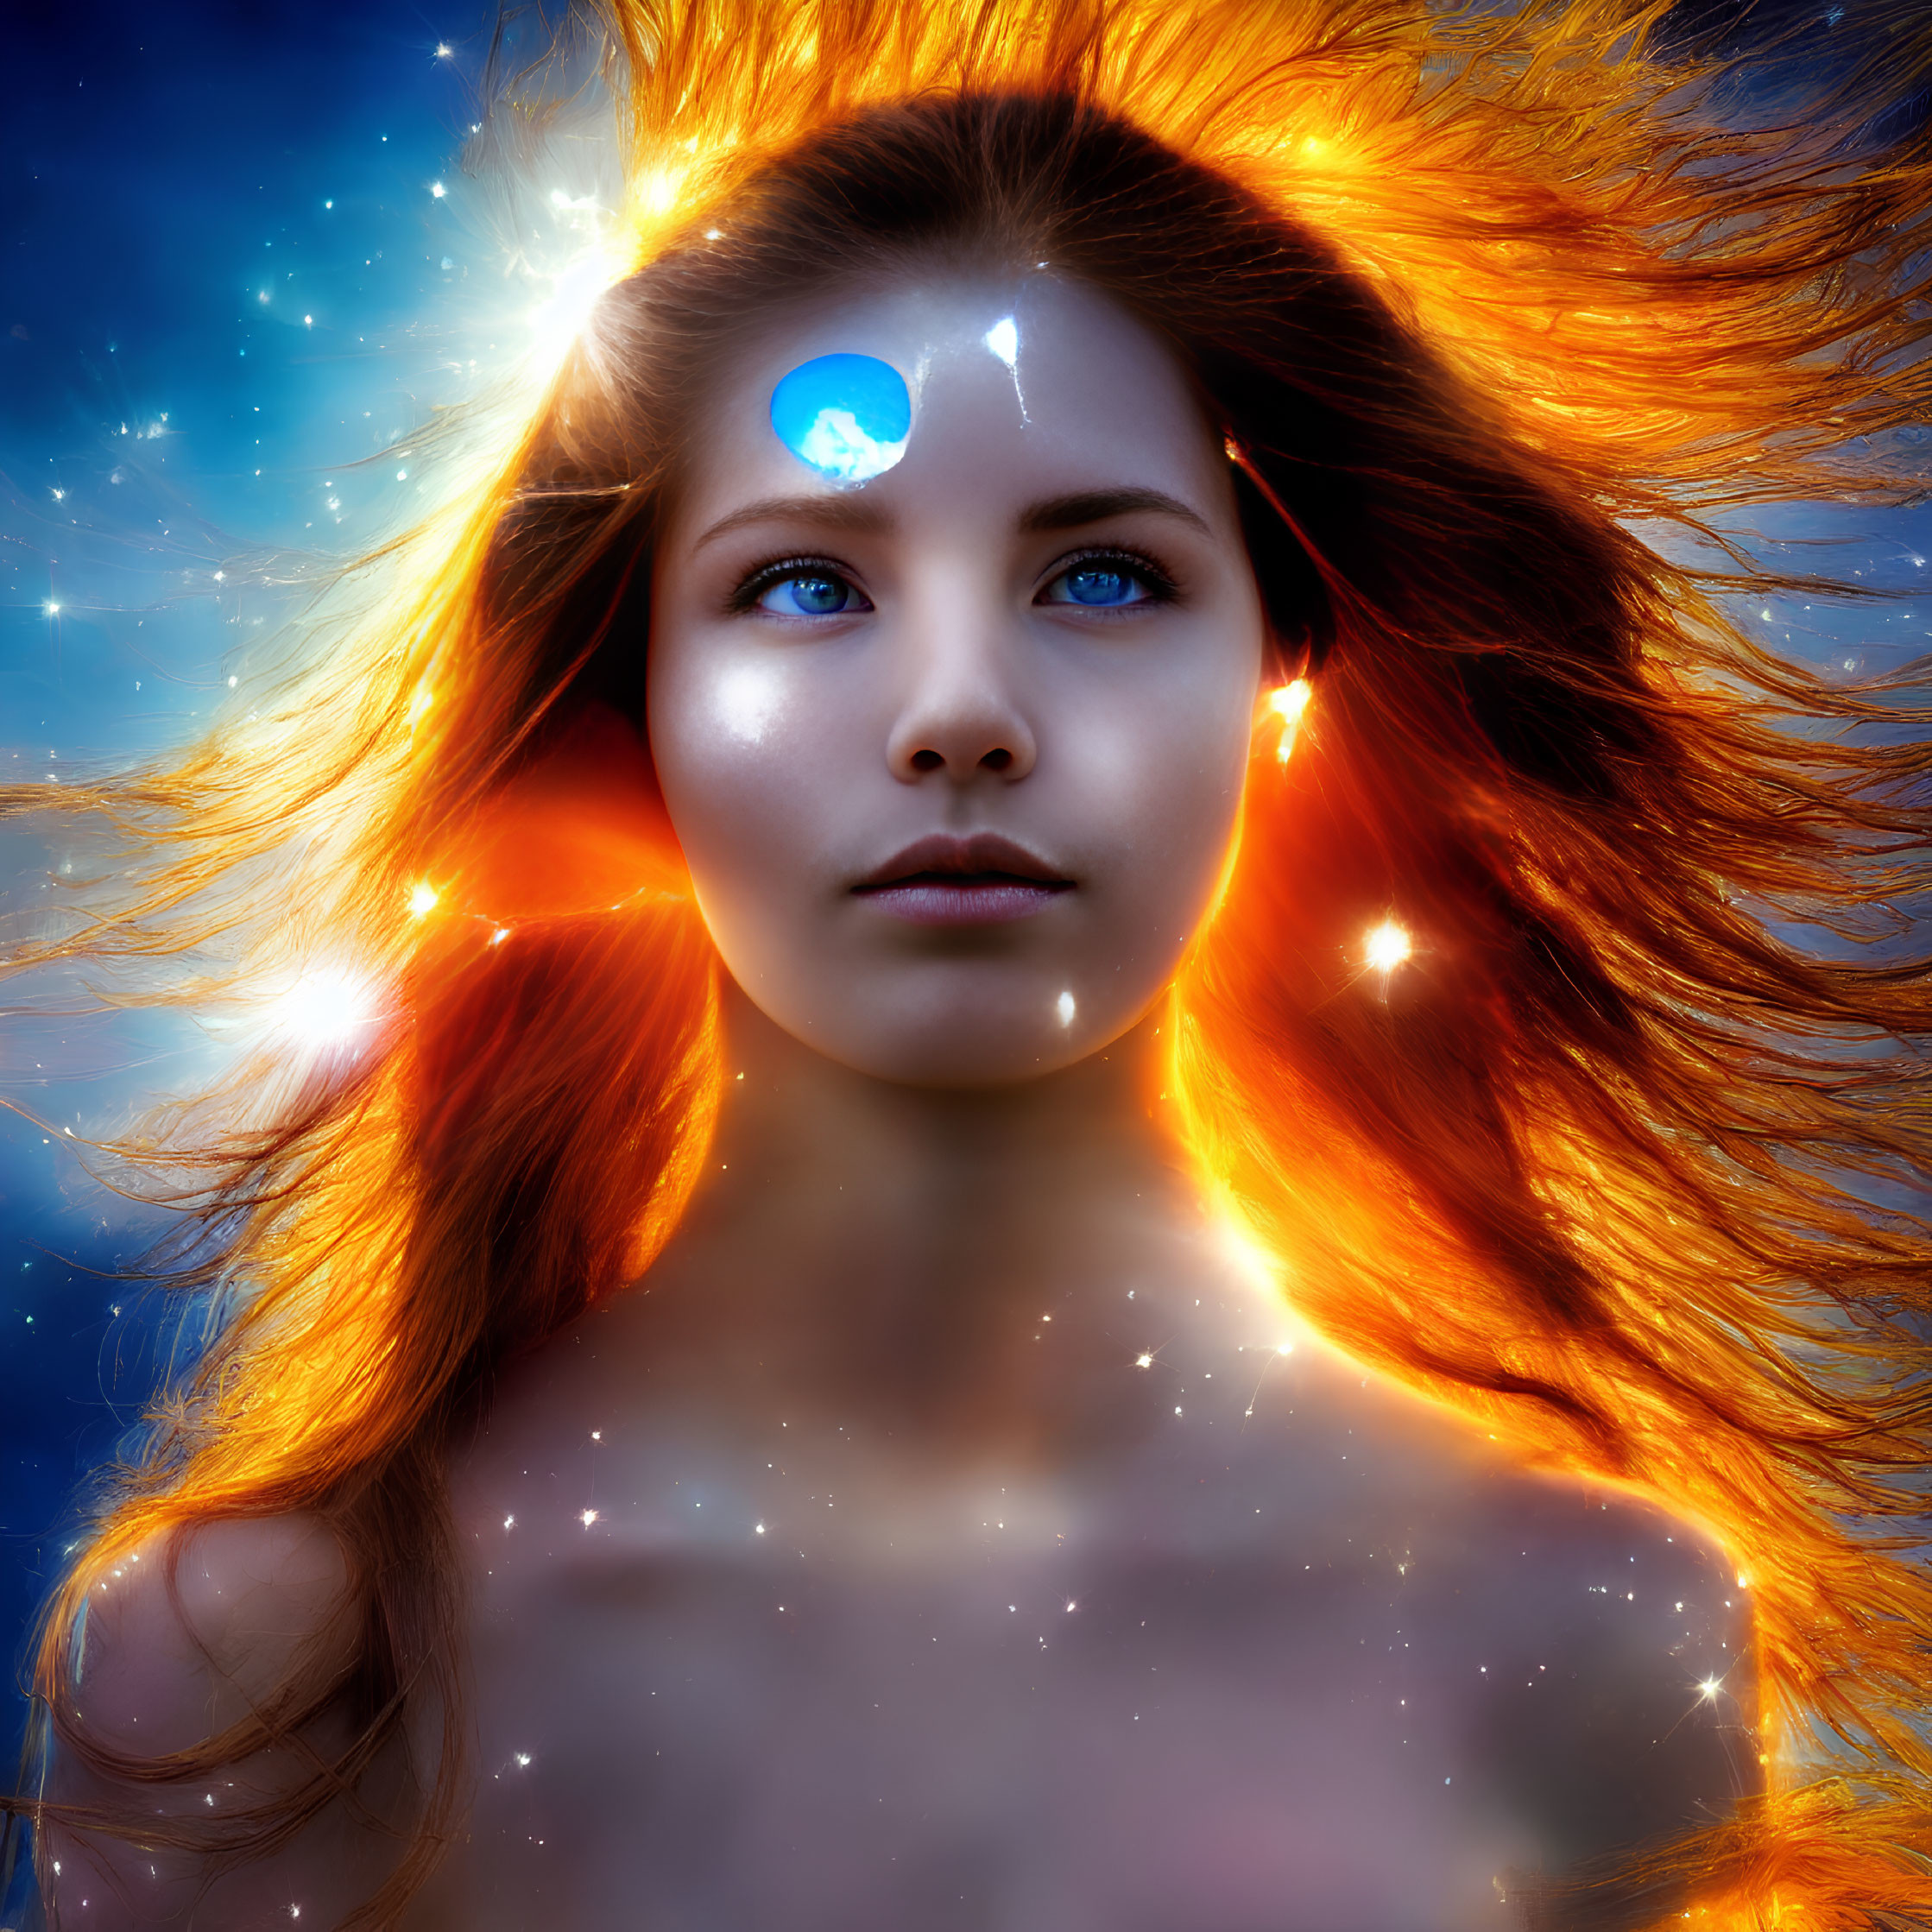 Fiery red-haired woman with crescent moon in cosmic setting